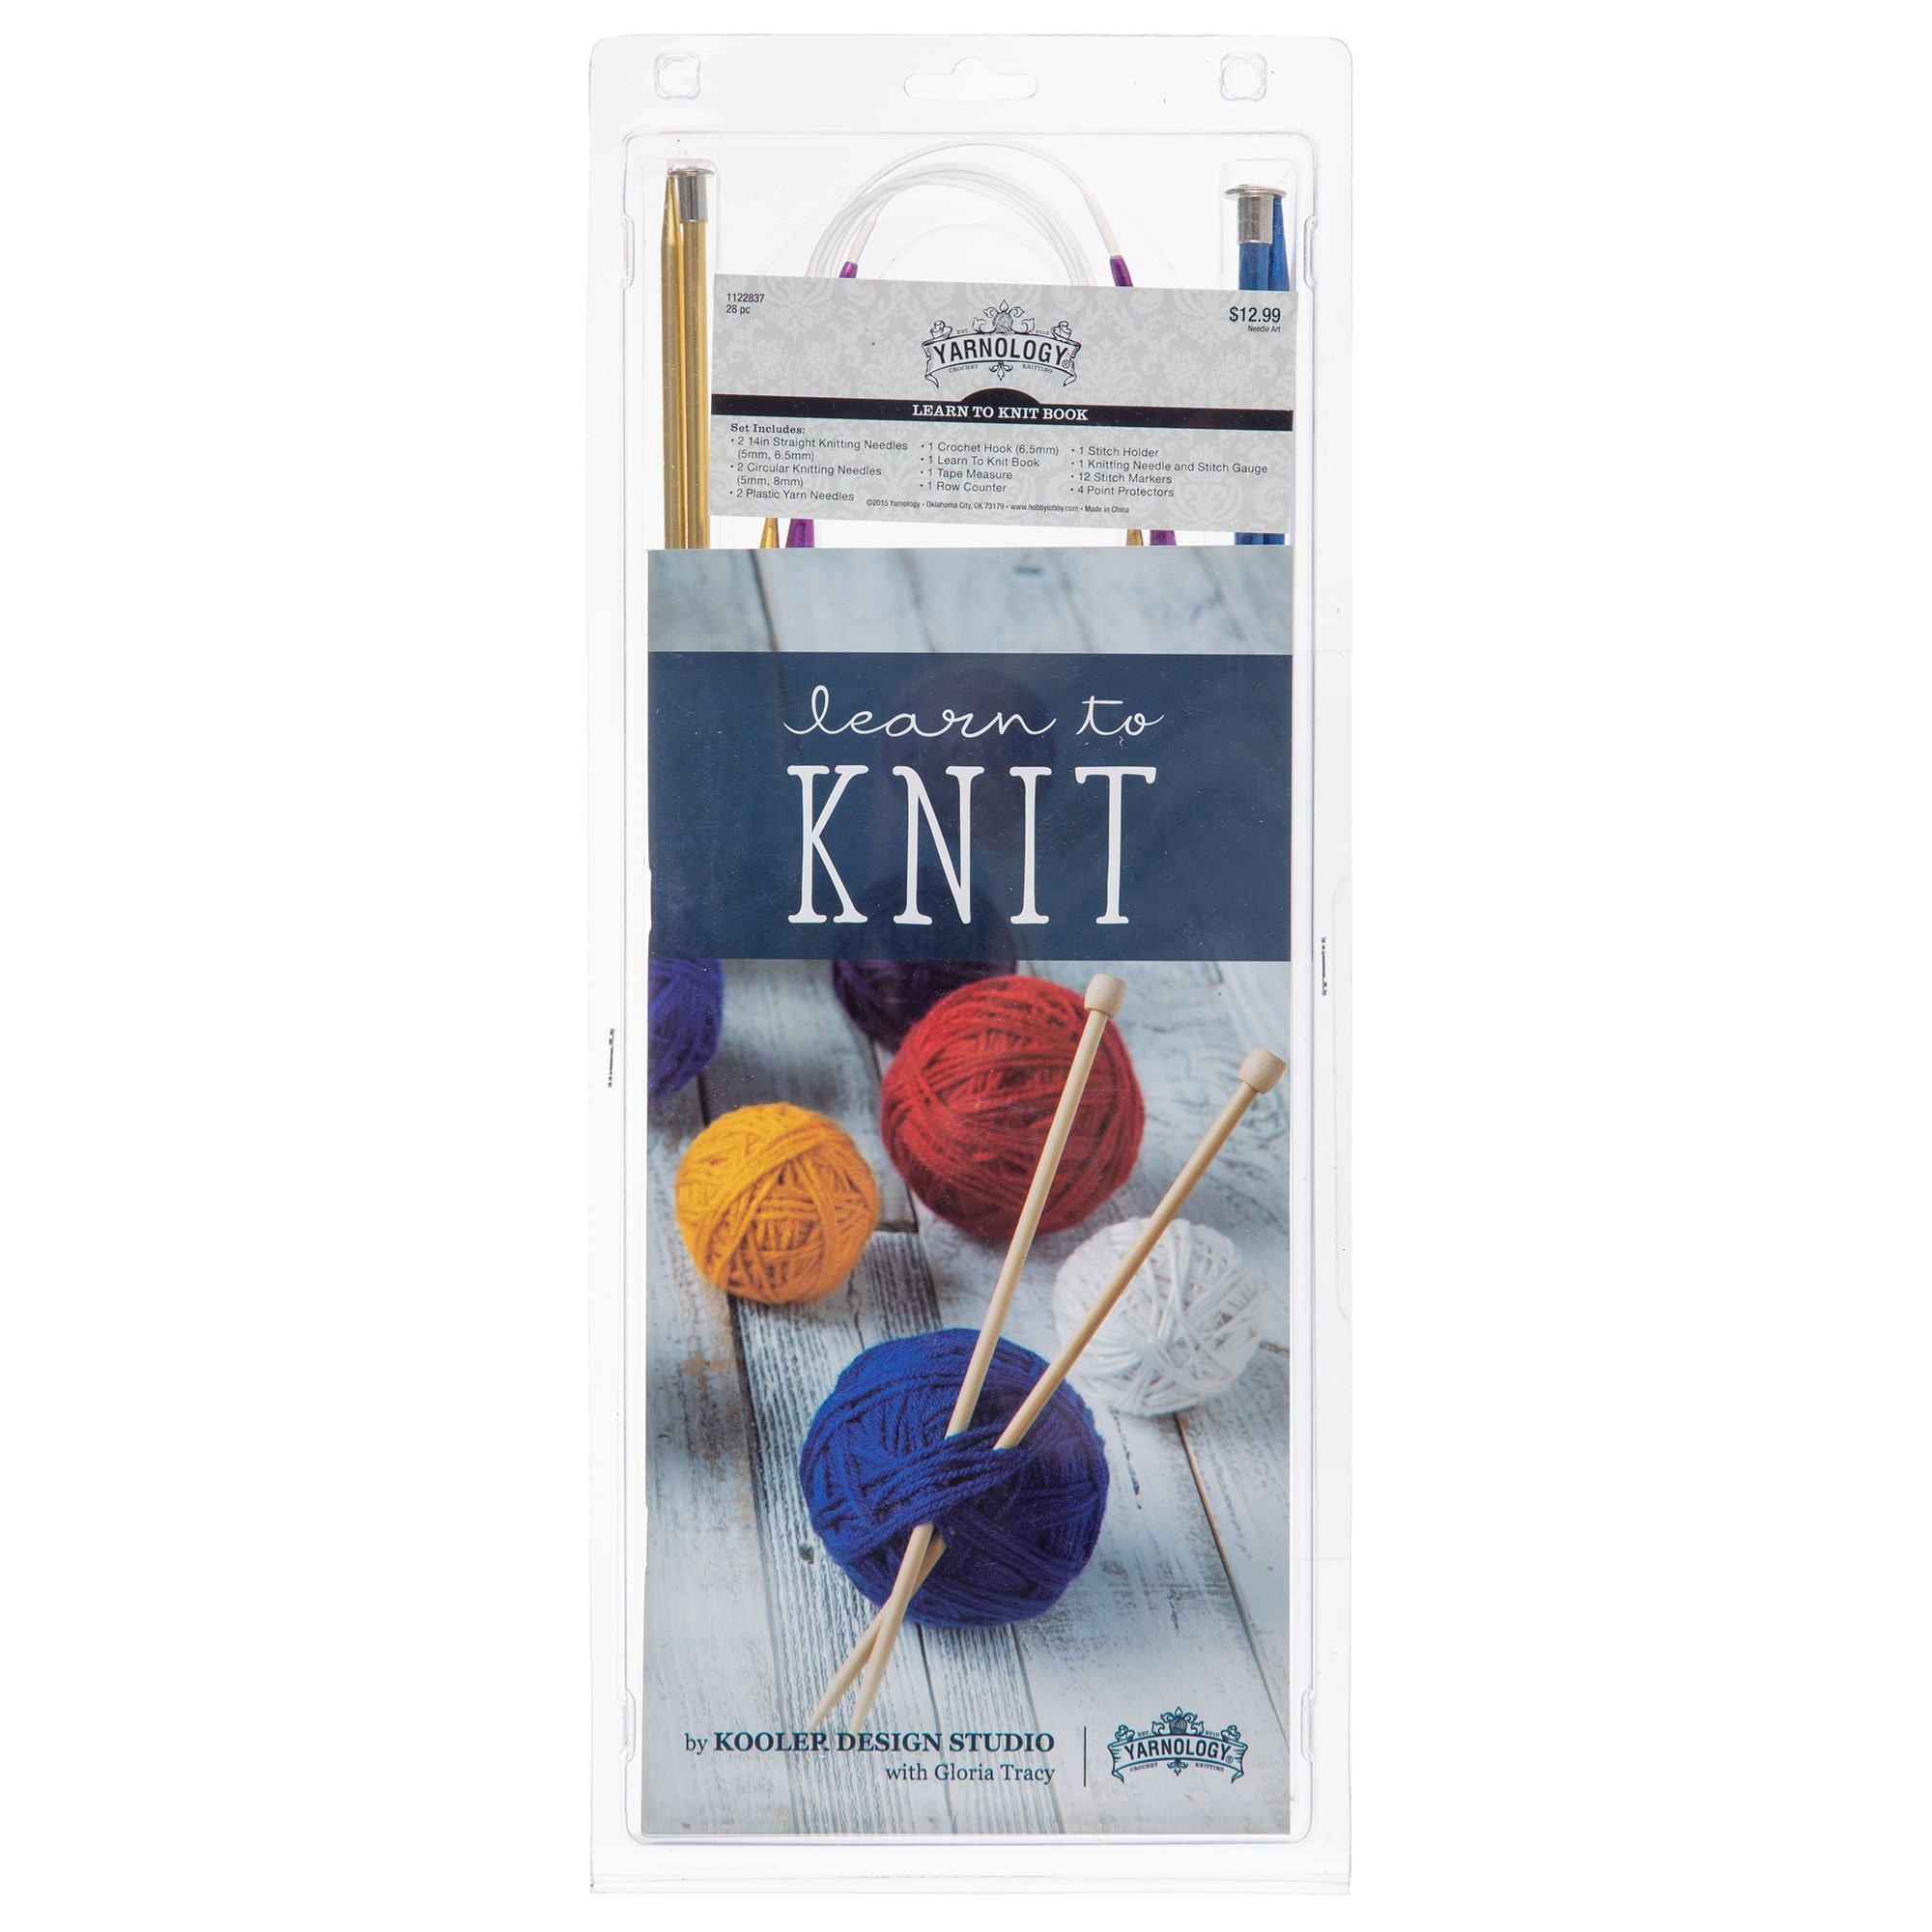  CraftLab Knitting Kit for Beginners, Kids and Adults Includes  All Knitting Supplies: Wool Yarn, Knitting Needles, Yarn Needle and  Instructions – Fantastic Gift